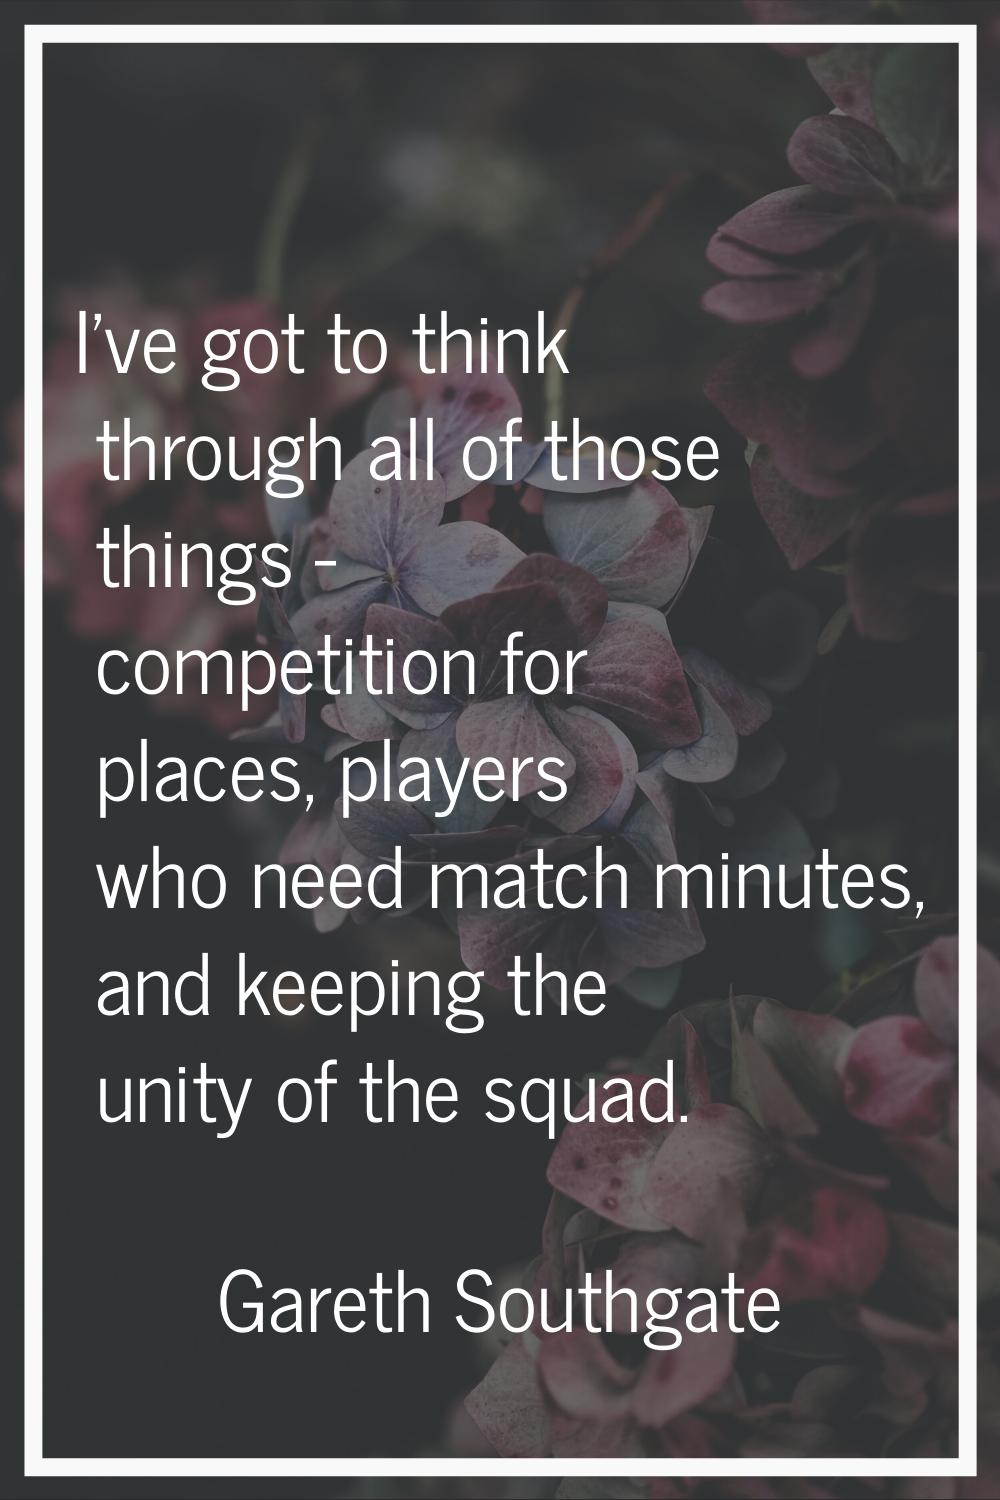 I've got to think through all of those things - competition for places, players who need match minu